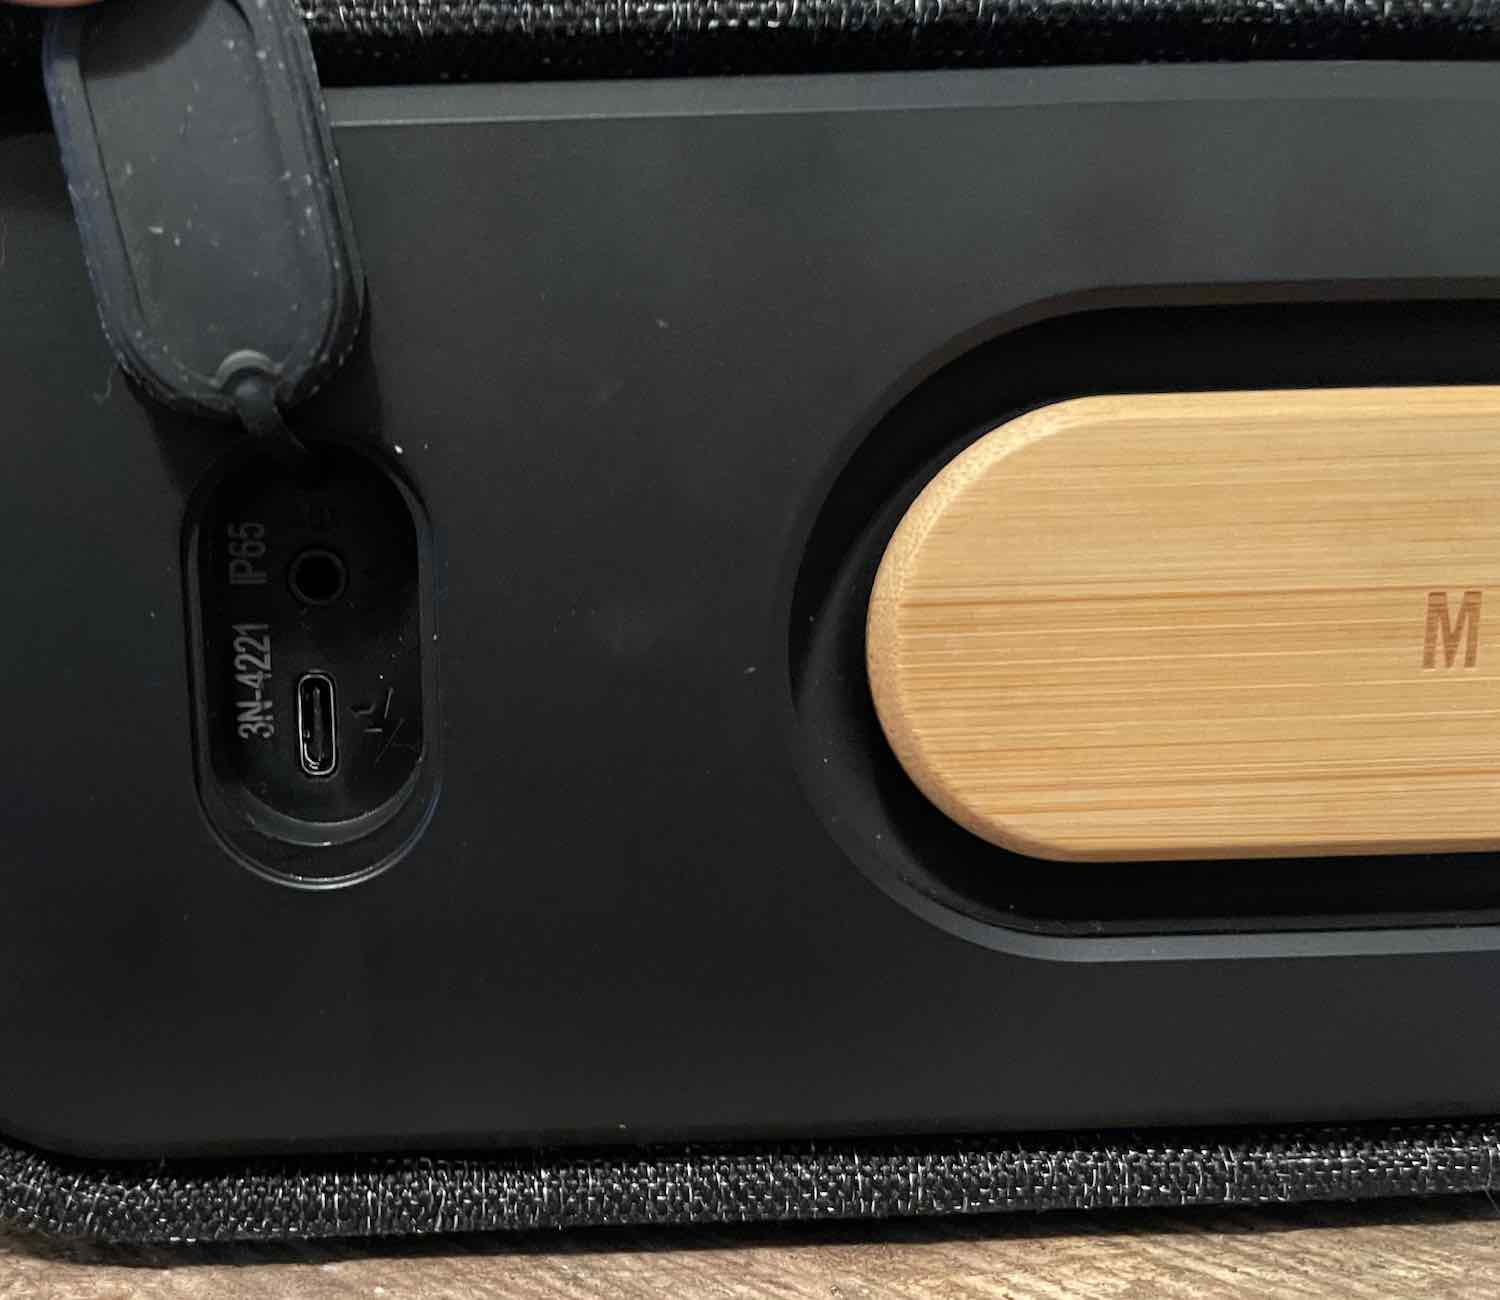 House of Marley Bluetooth speaker review